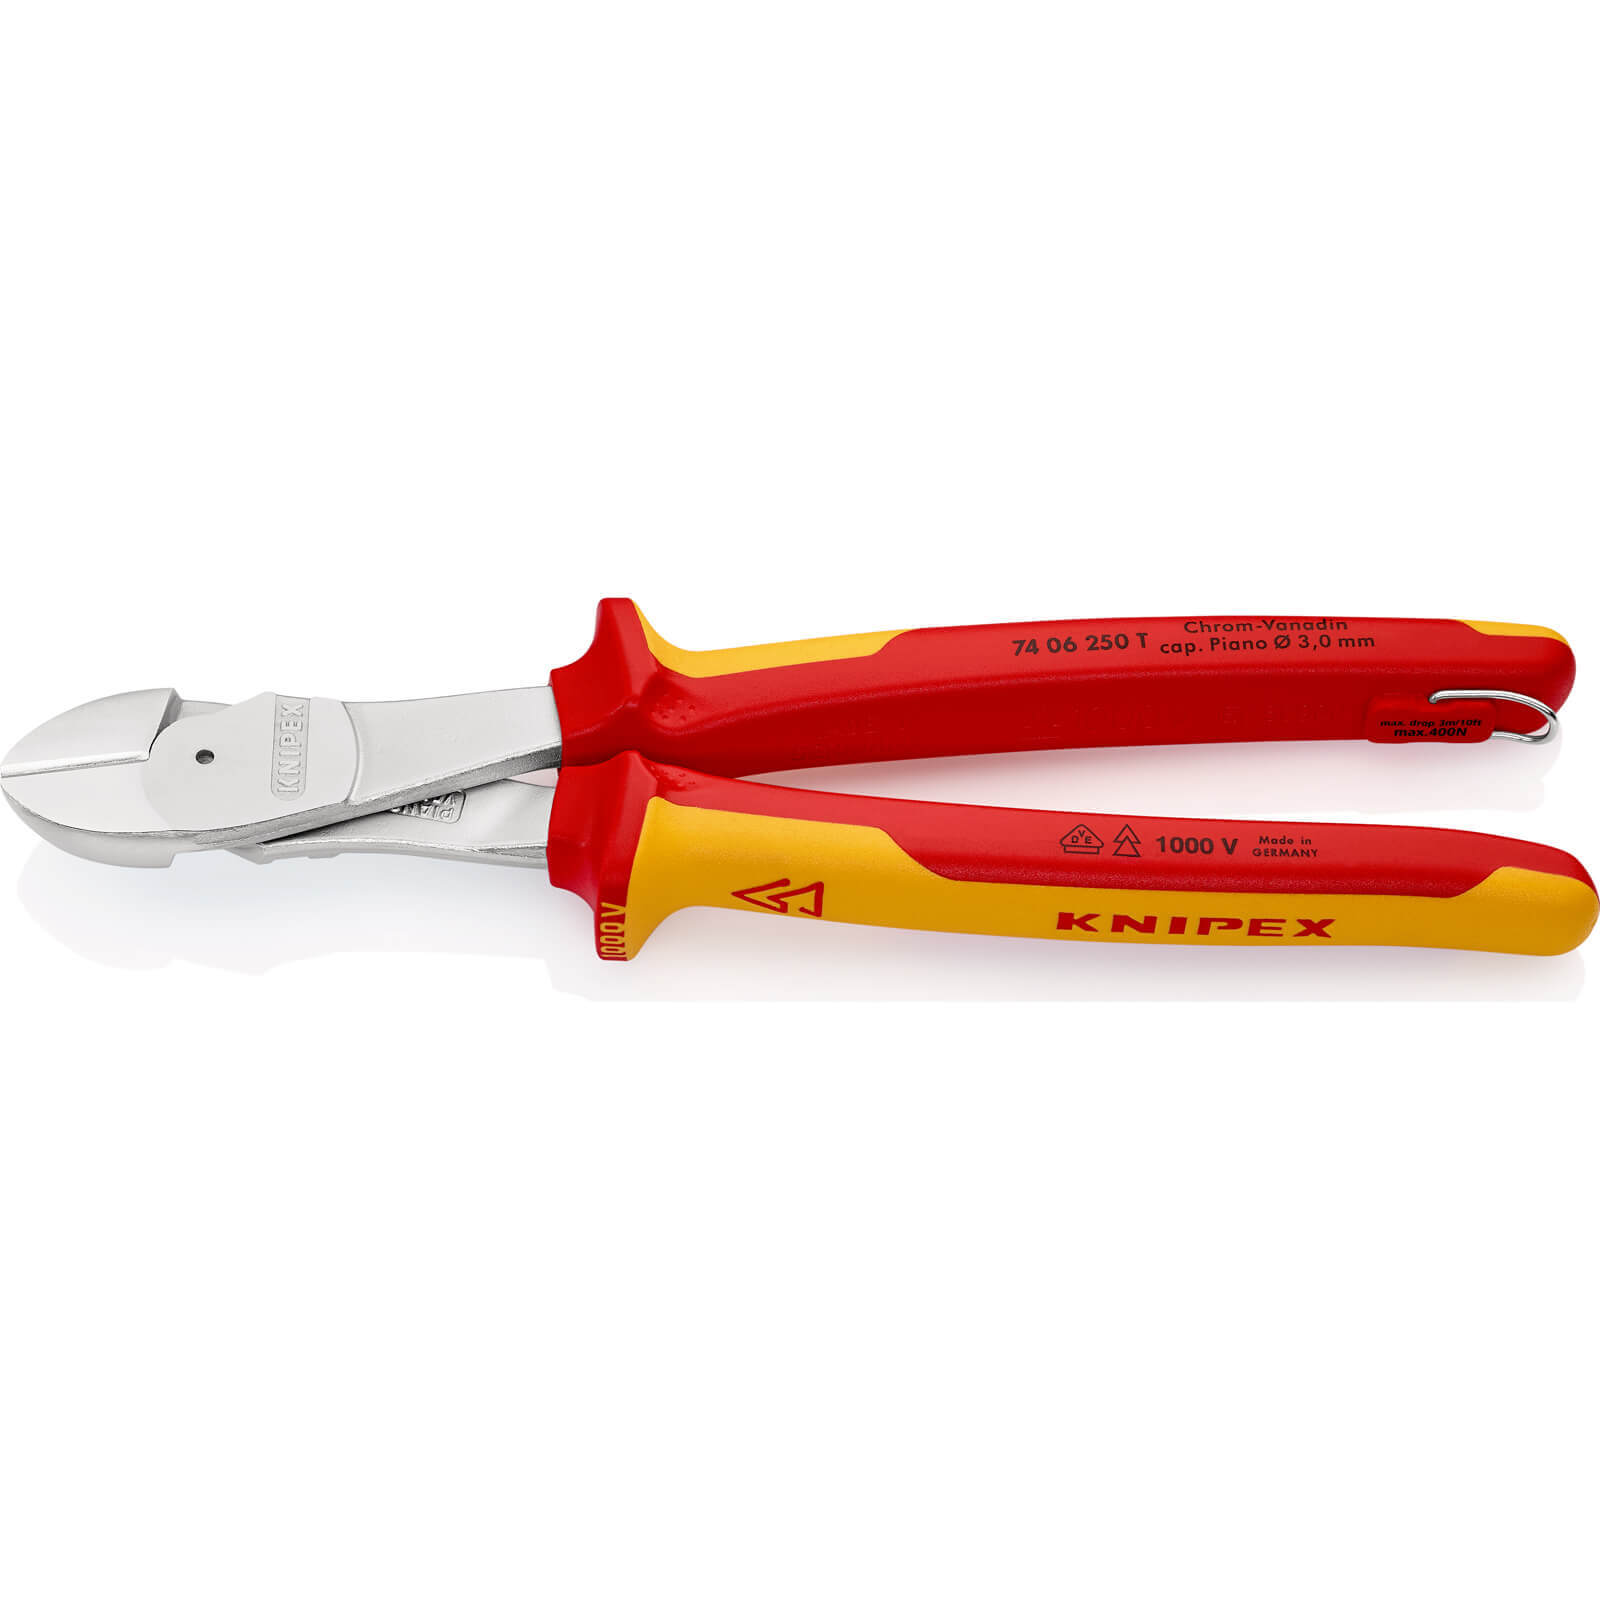 Photo of Knipex 74 06 Vde Insulated High Leverage Tethered Diagonal Cutting Pliers 250mm